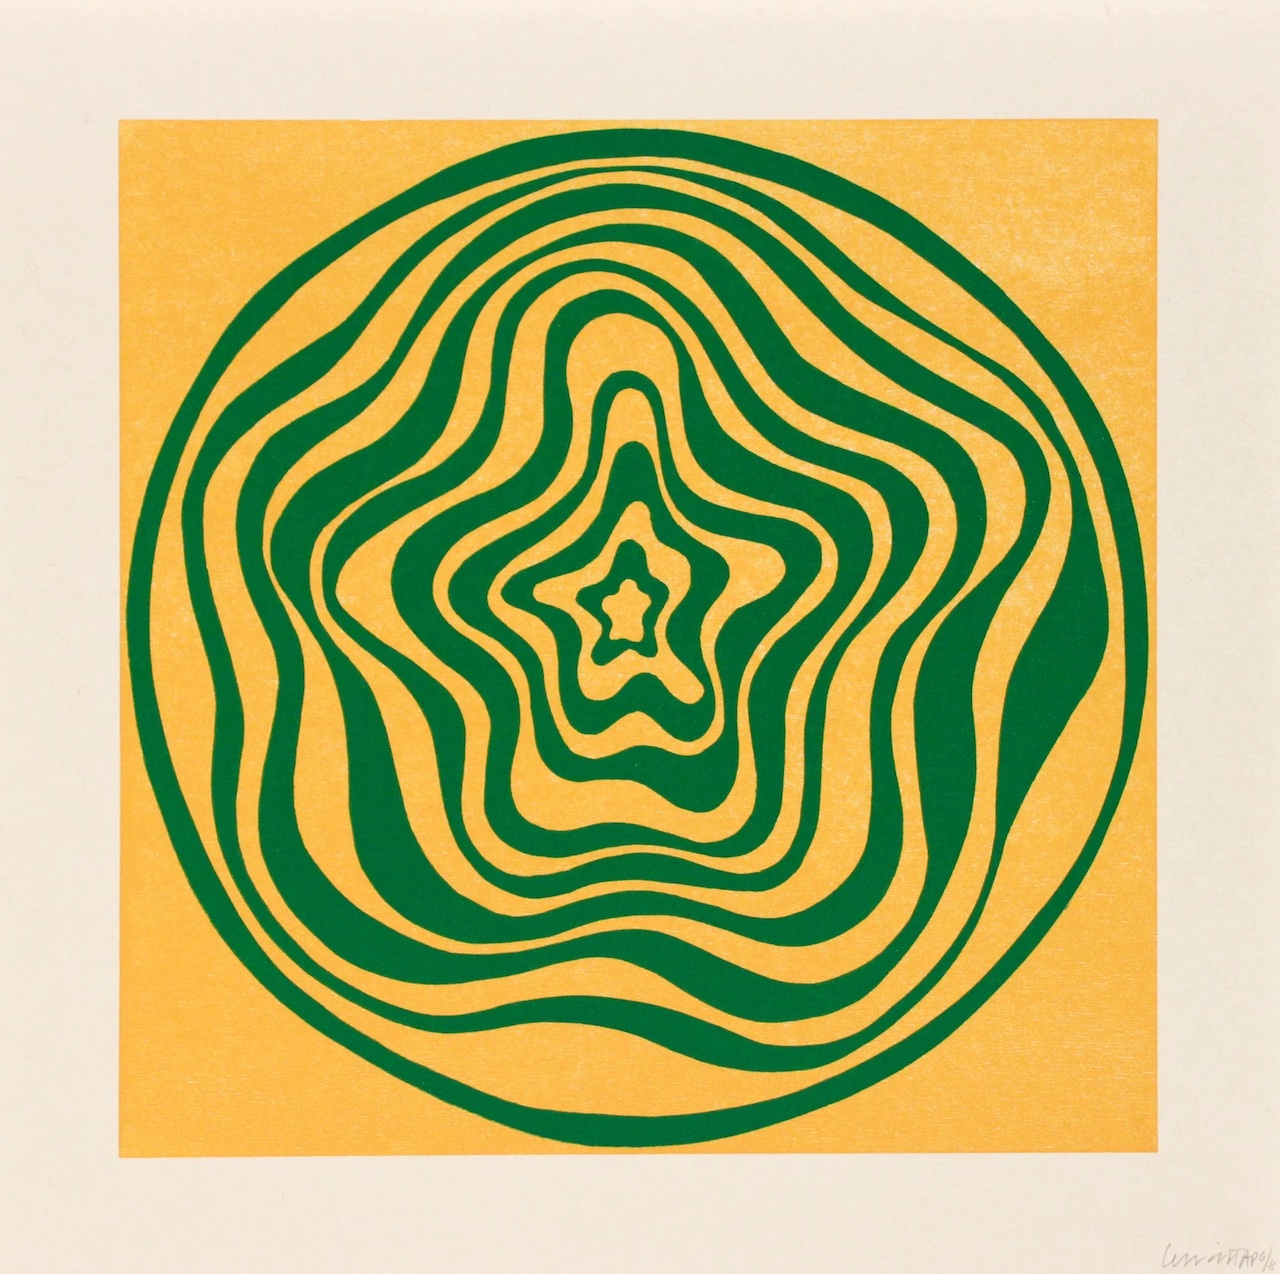 The Wick - Sol Lewitt
Concentric Irregular Bands, 1997
A set of four woodcuts on beige wove paper